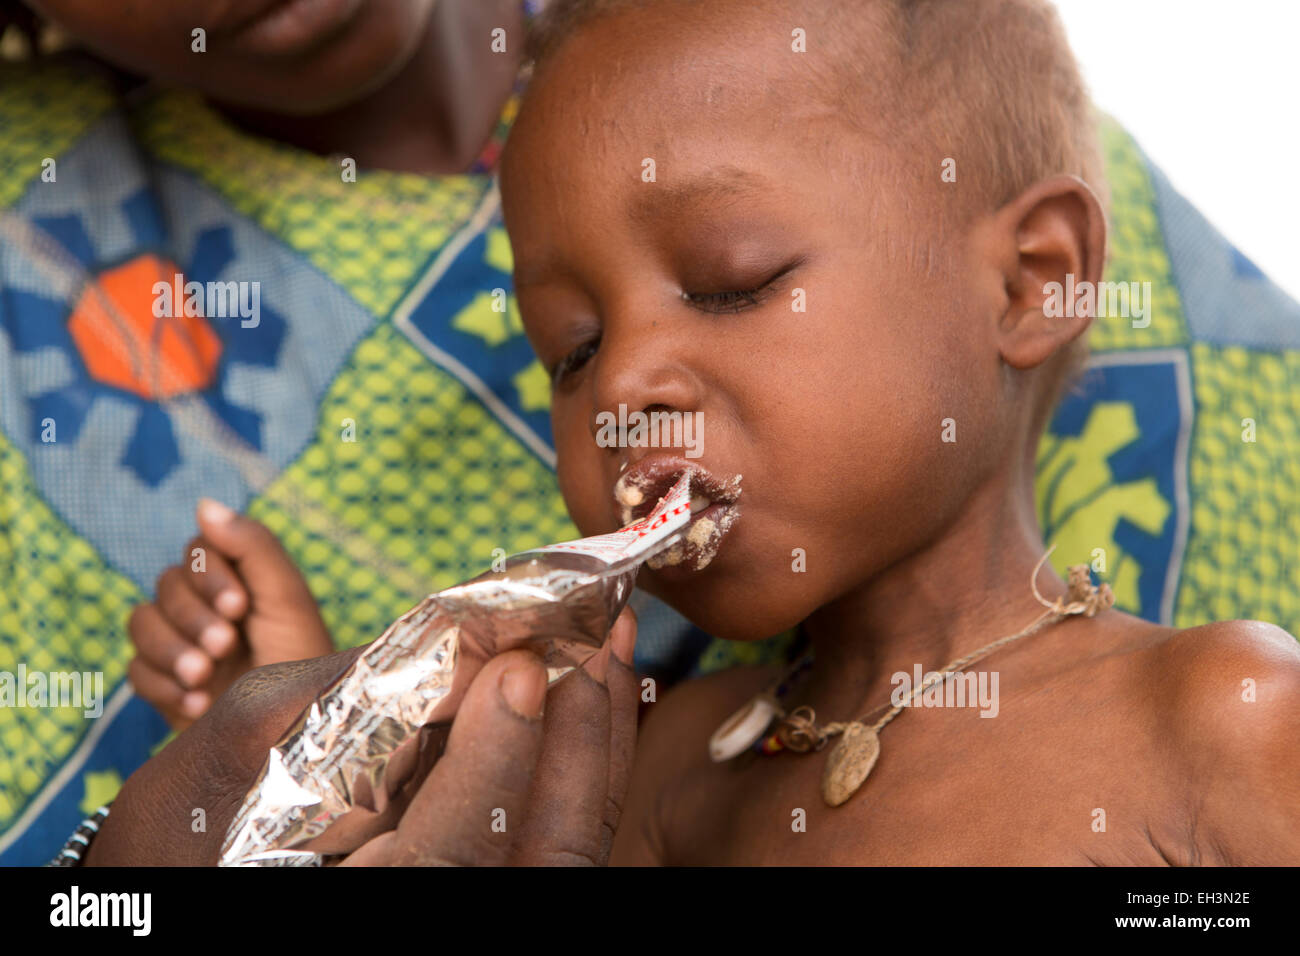 KOMOBANGAU, TILLABERI PROVINCE, NIGER, 15th May 2012: Fatimata Birma, and her son aged two, are treated at the health clinic for severe malnutition. Soumaila eats Plumpy Nut. Stock Photo